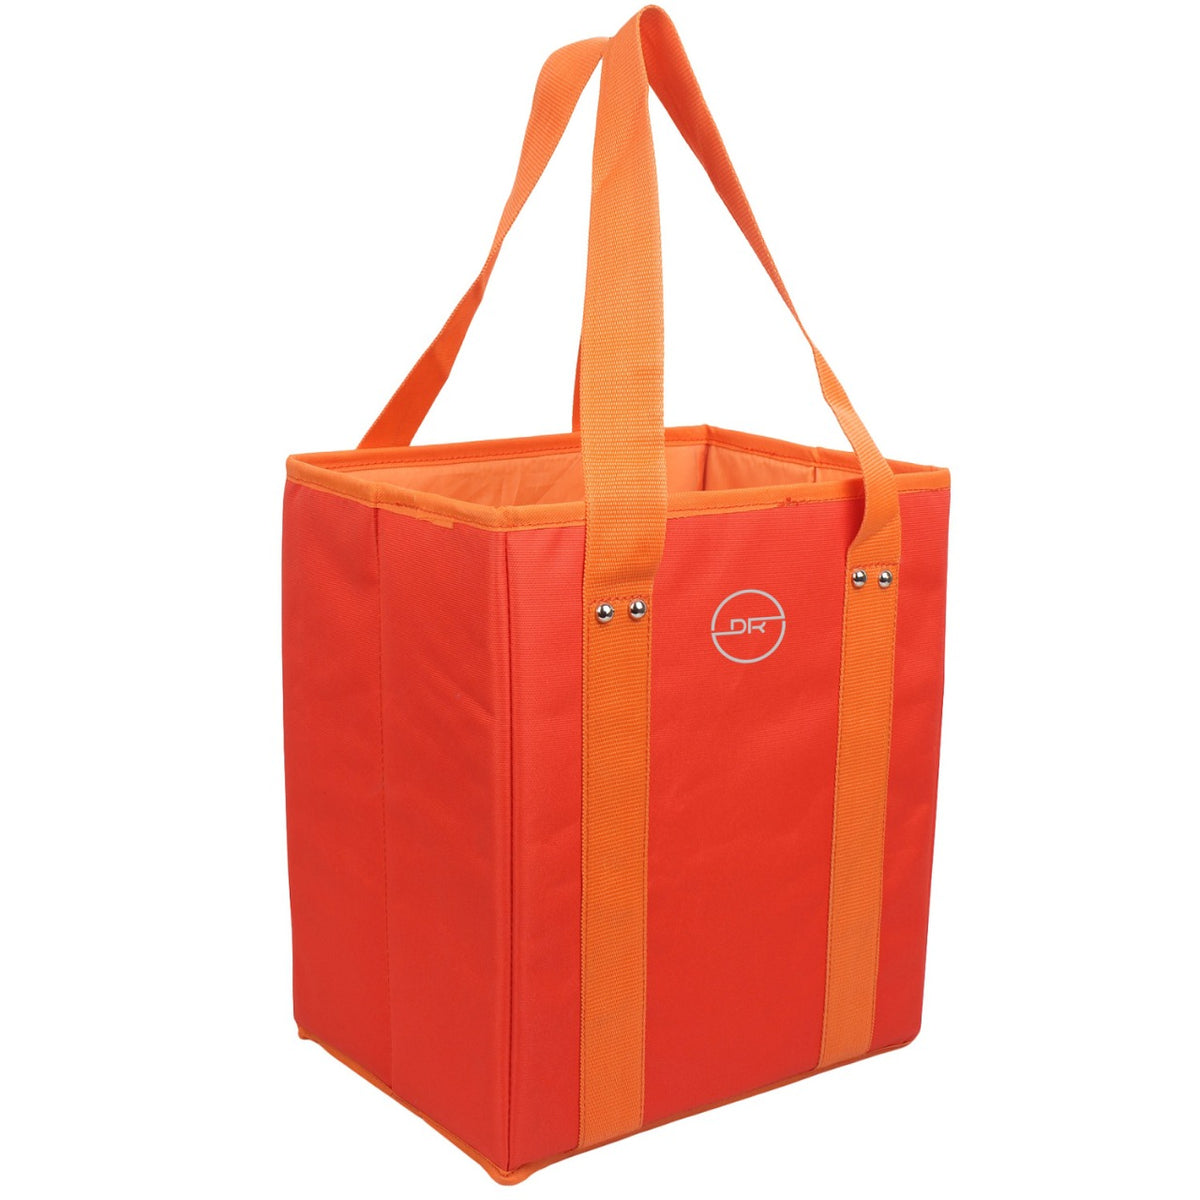 Heavy Duty Waterproof Shopping Bags Fully Collapsible Grocery Vegetable Bag